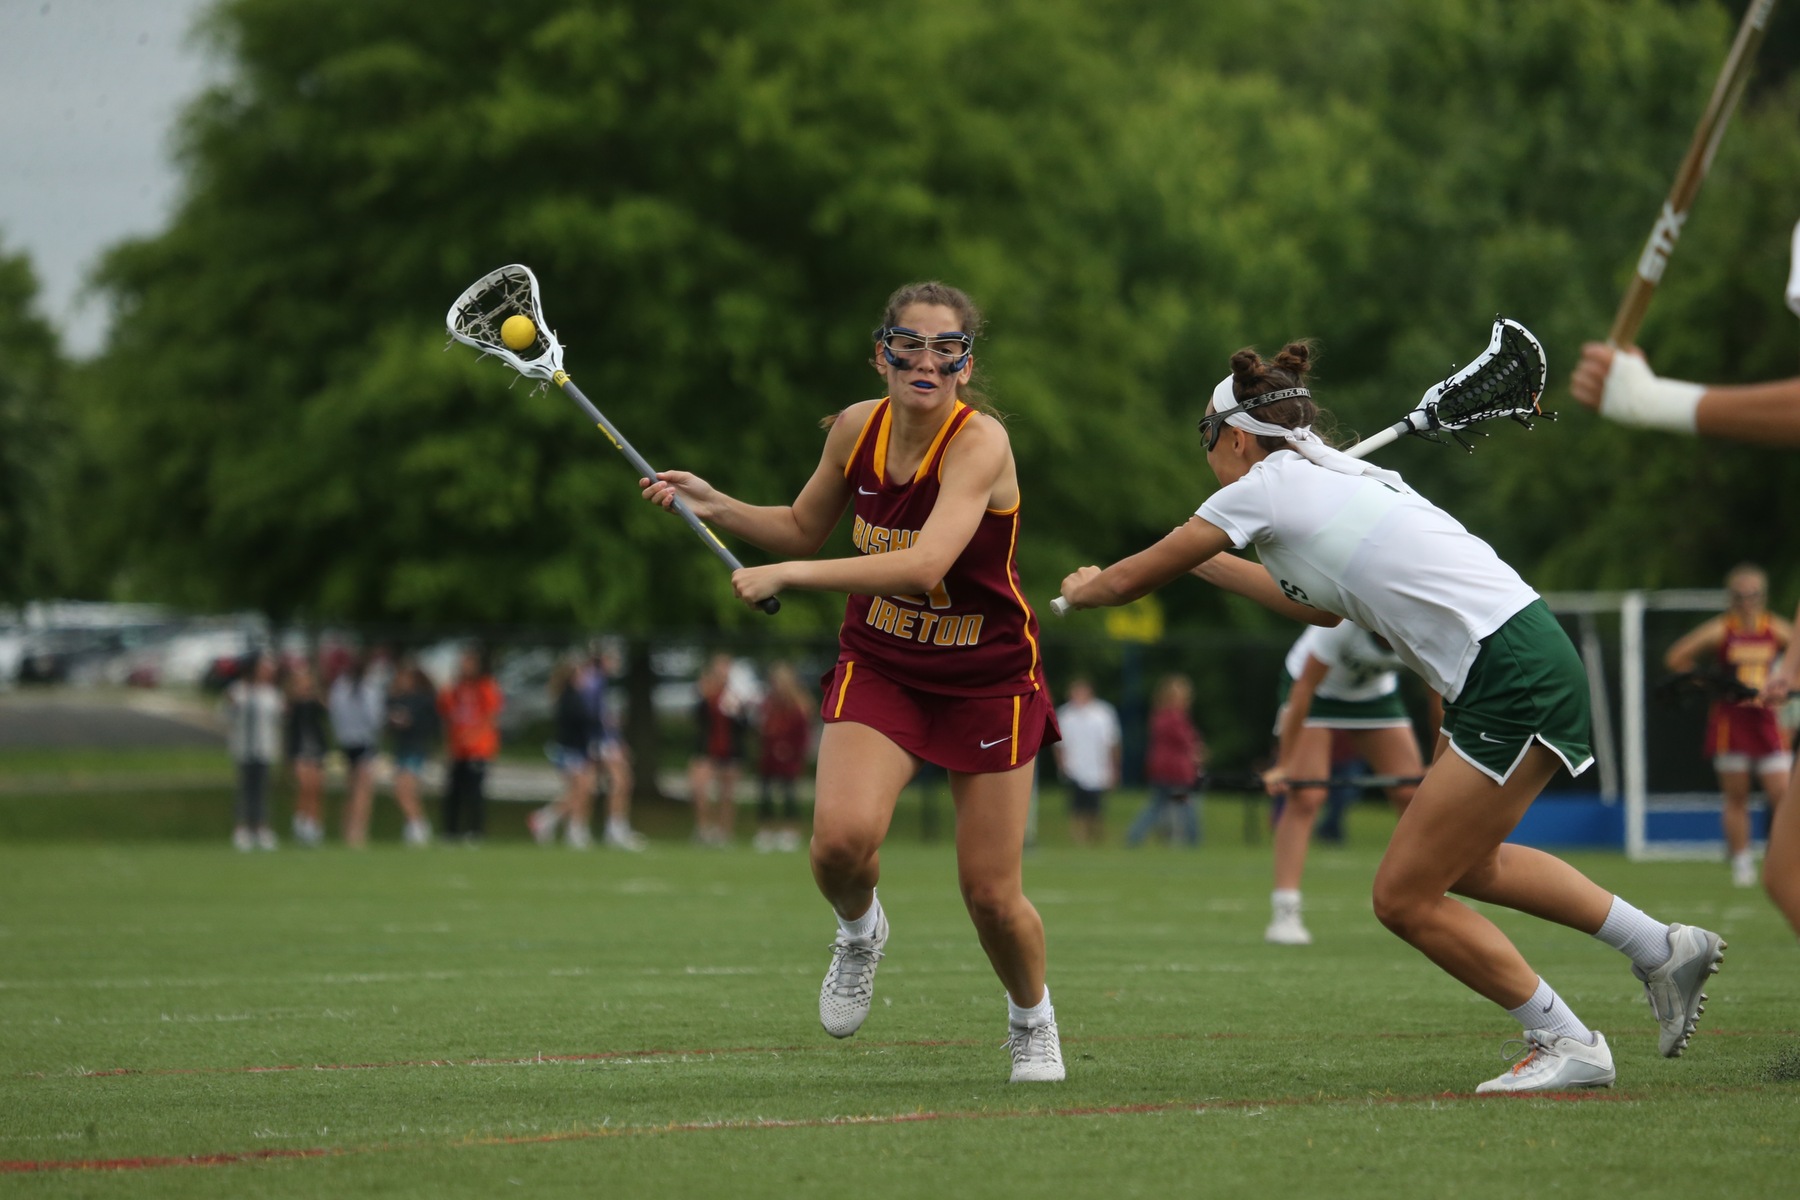 Madison Mote (Bishop Ireton) is the Player of the Year and Bridget Looney (Elizabeth Seton) is the Coach of the Year.